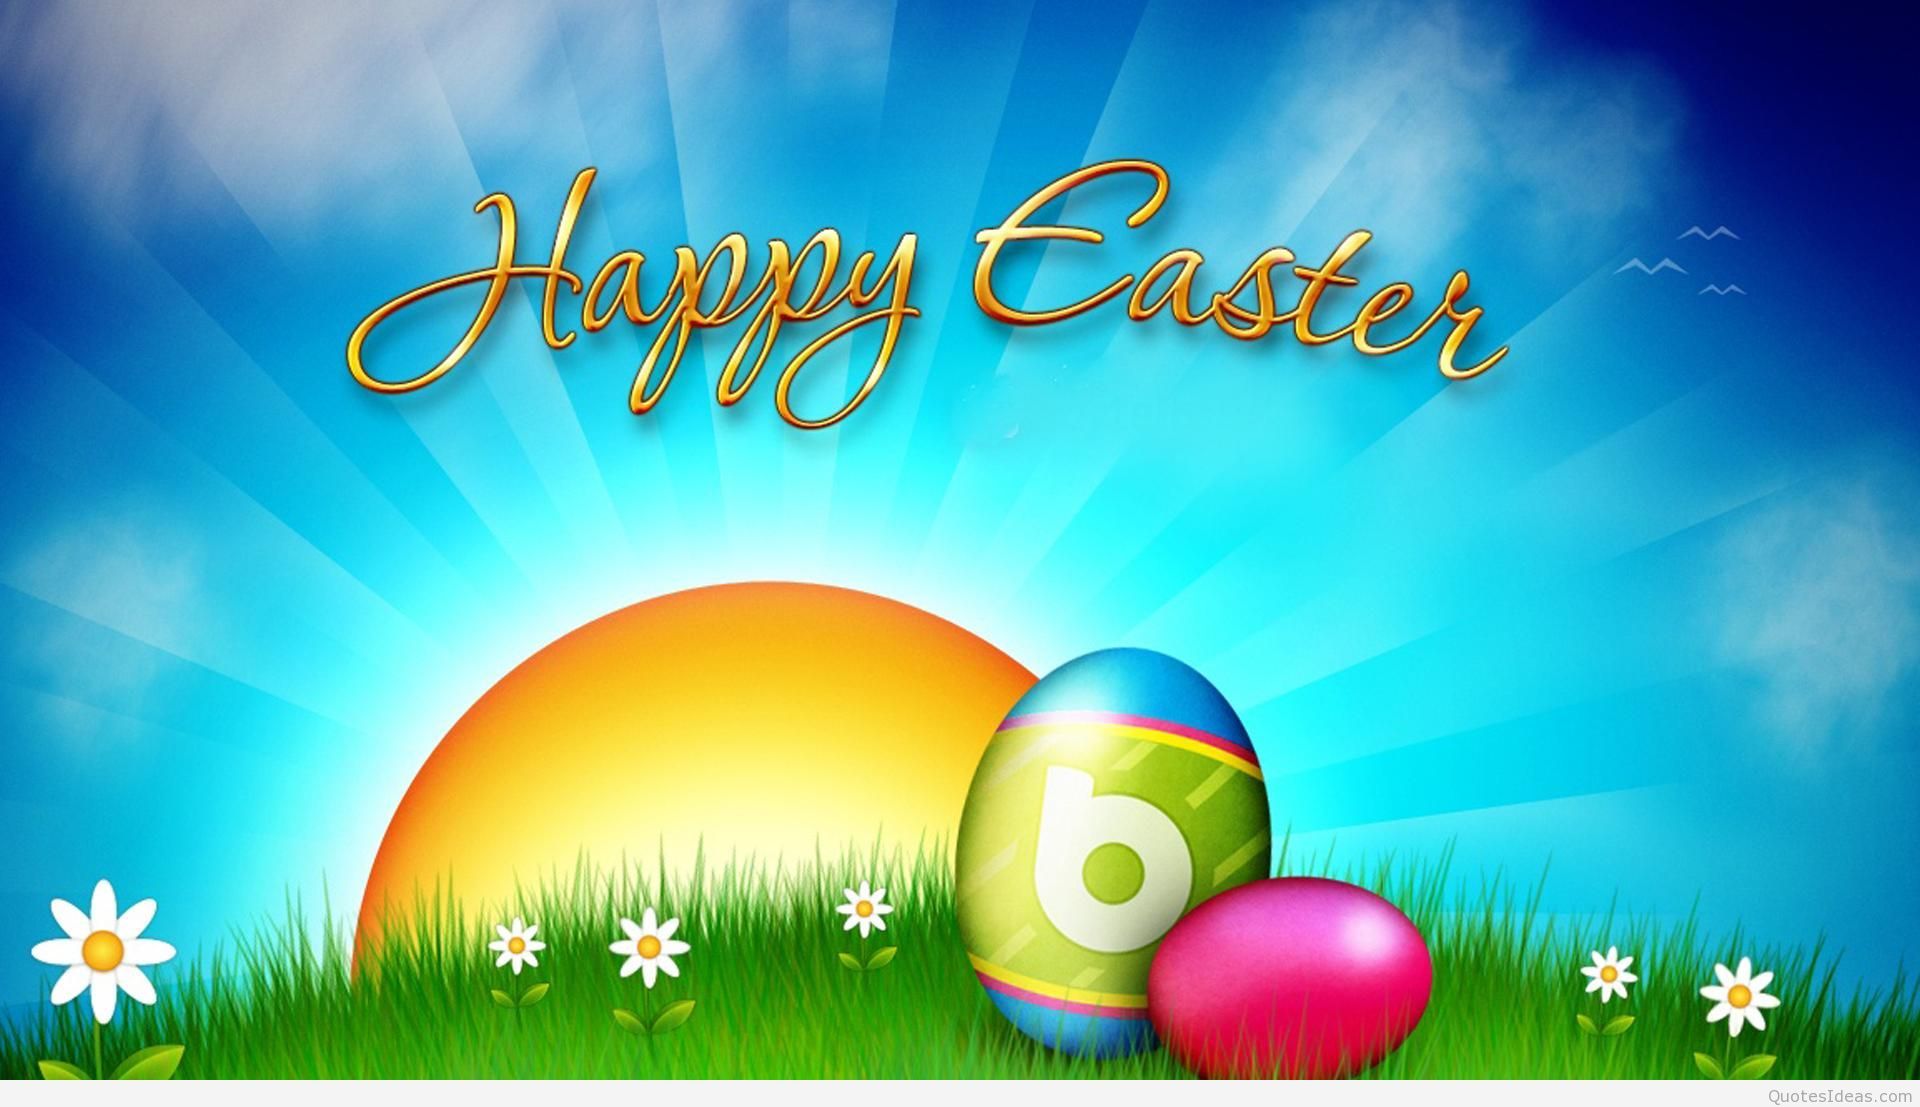 Free download Happy Easter sunday wallpaper HD wishes 1920x1107